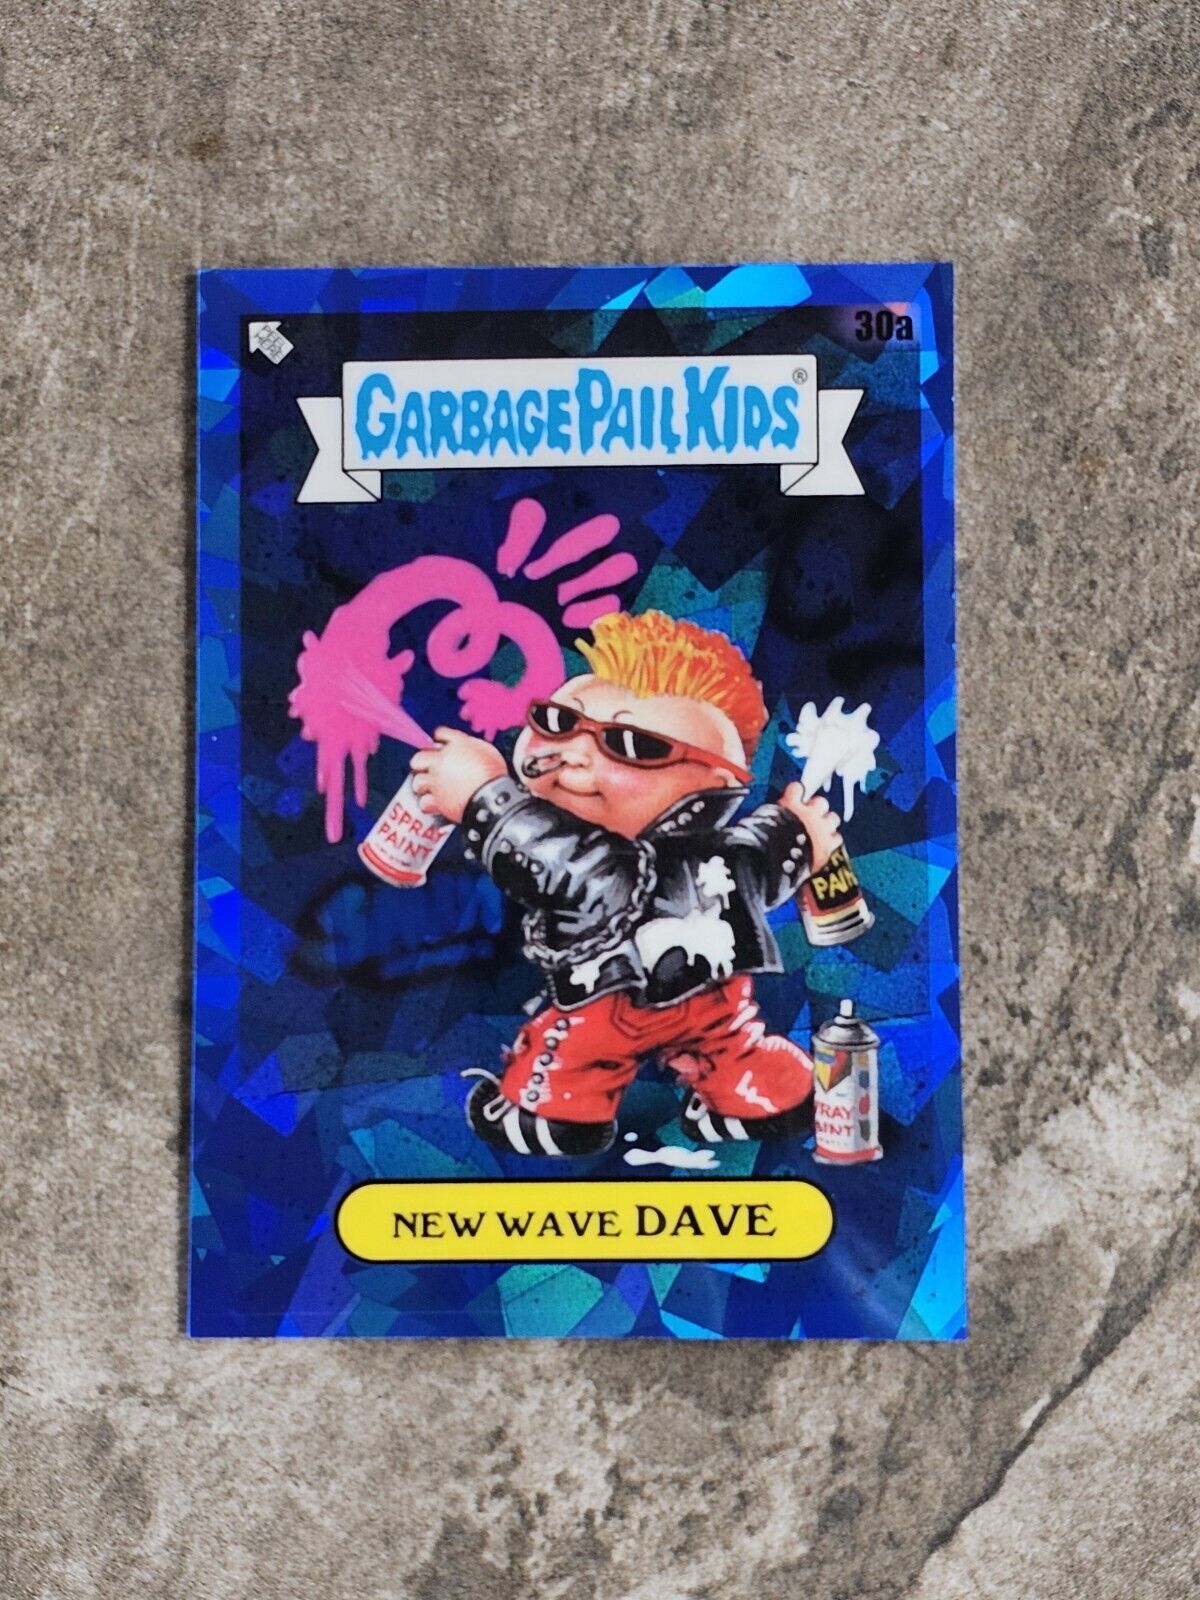 2020 Topps Garbage Pail Kids Sapphire Edition New Wave Dave 30a GPK OS1 🔥 